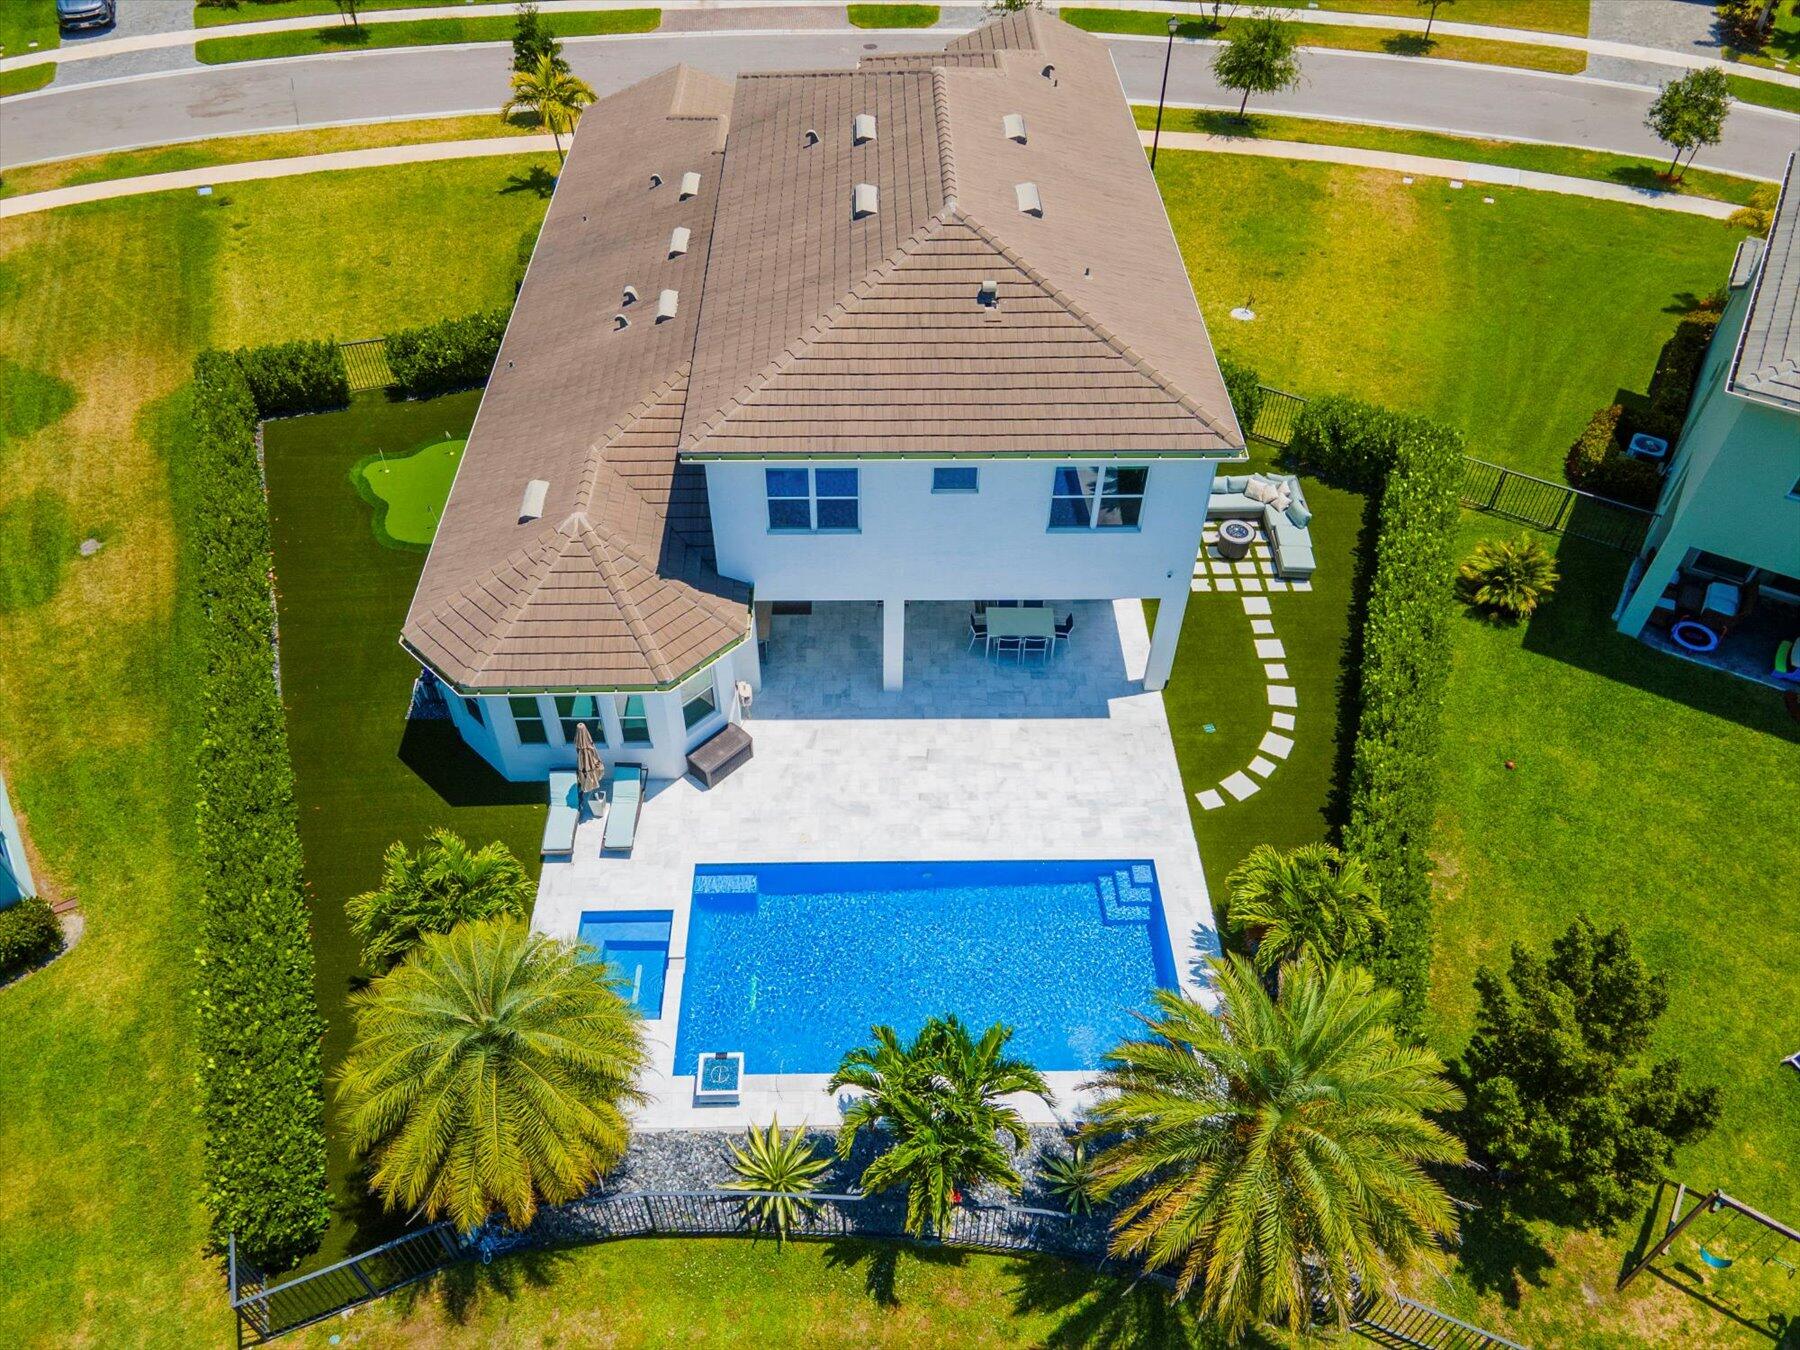 an aerial view of a house with swimming pool garden and patio